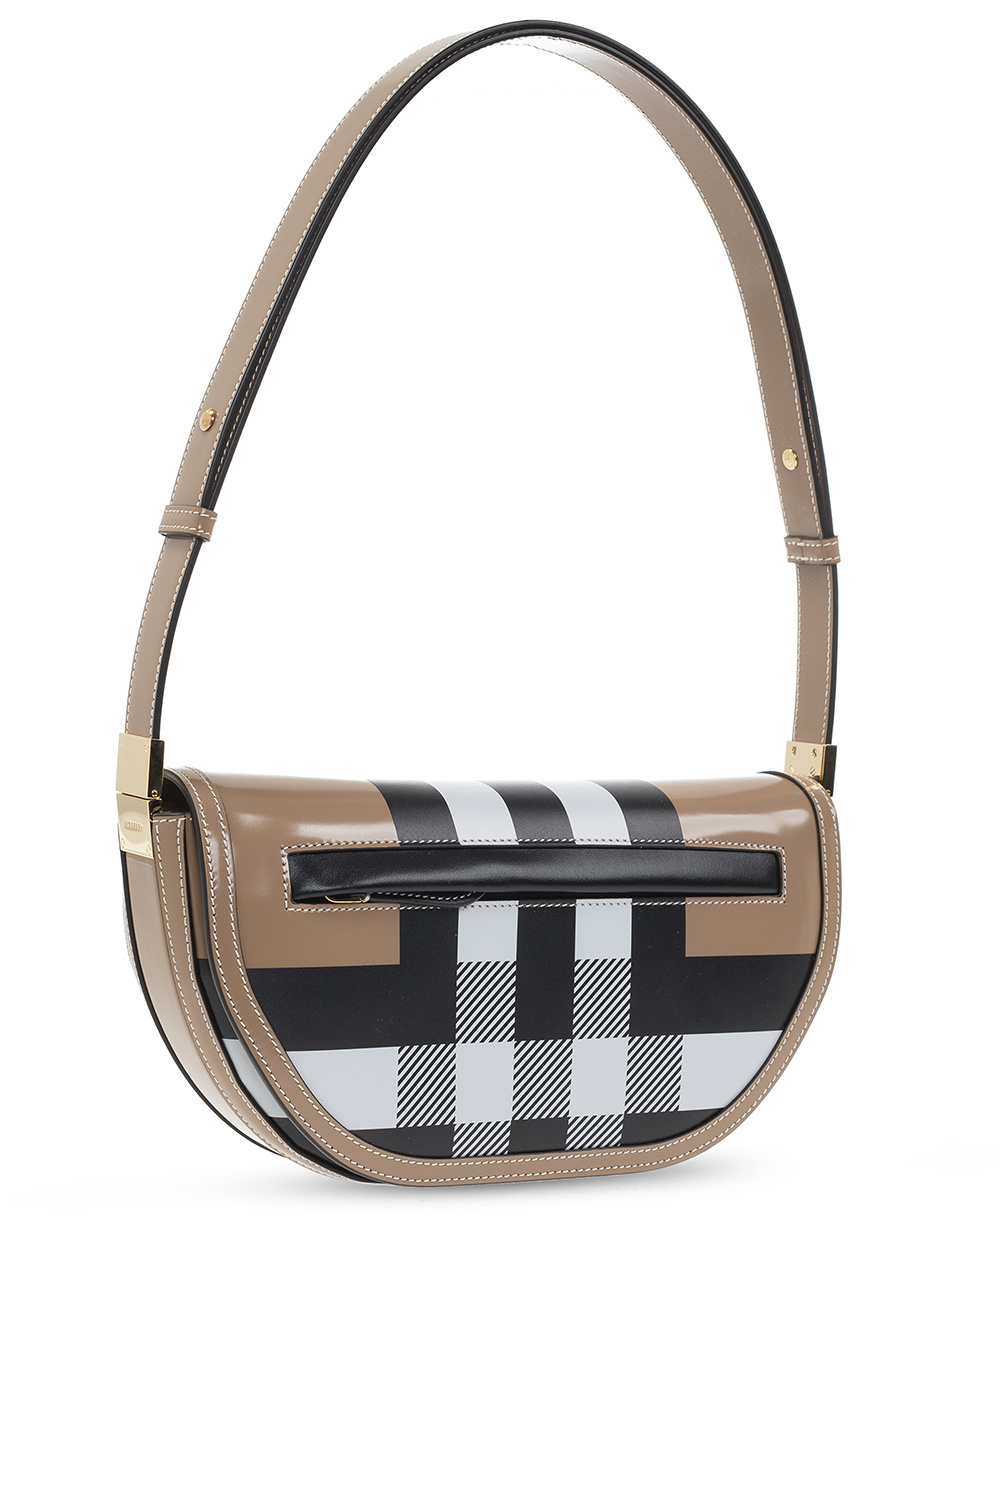 Burberry Olympia Vintage Check Shoulder Bag in White